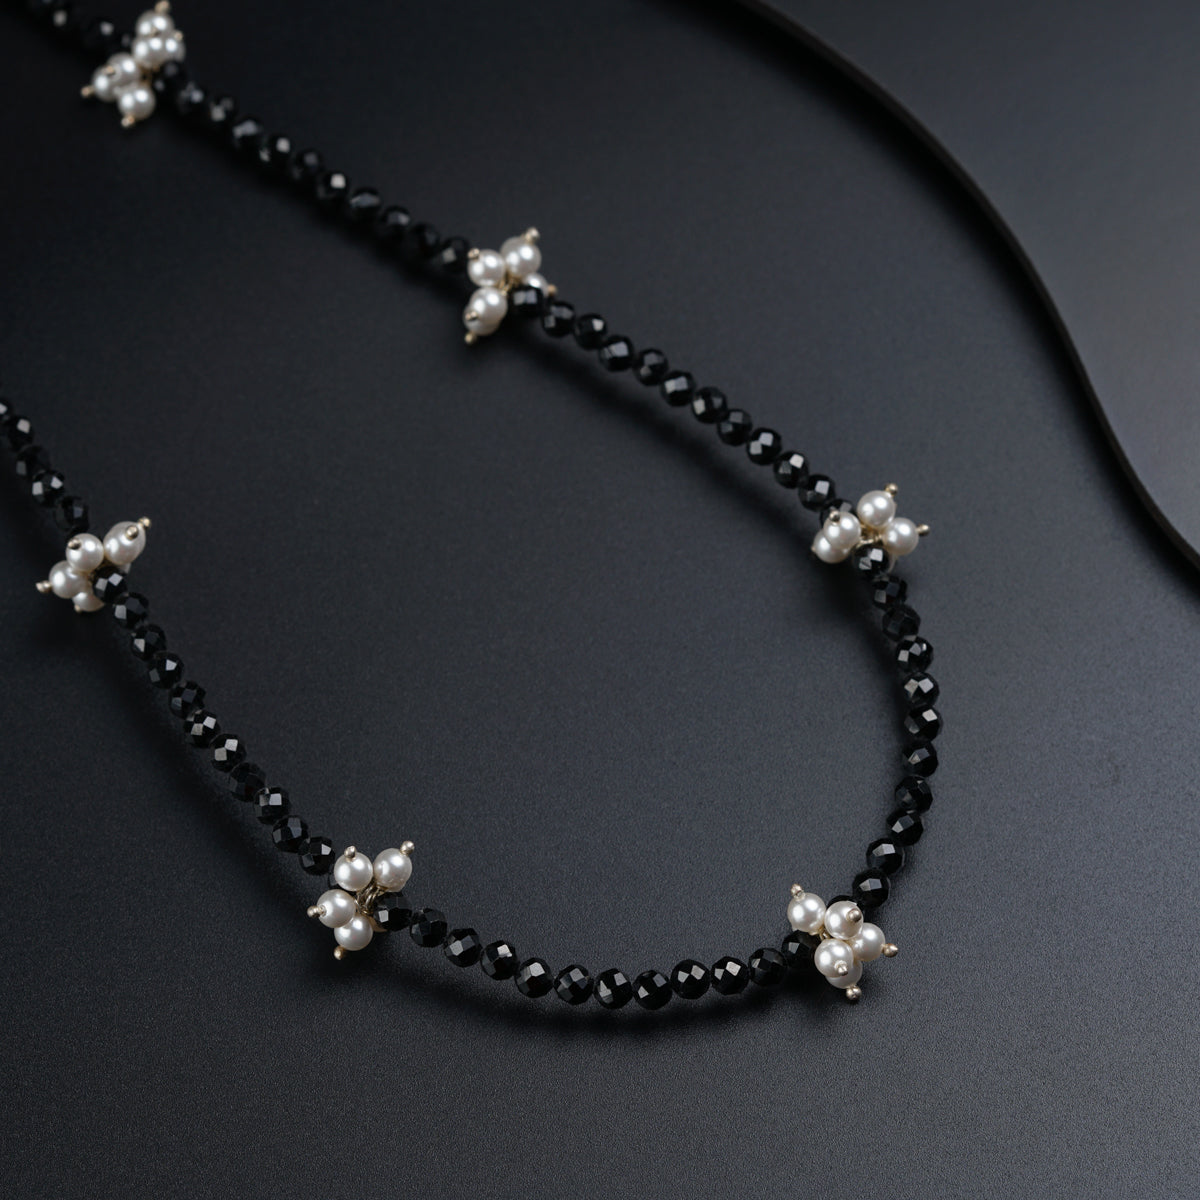 Black Spinel and Pearls Necklace